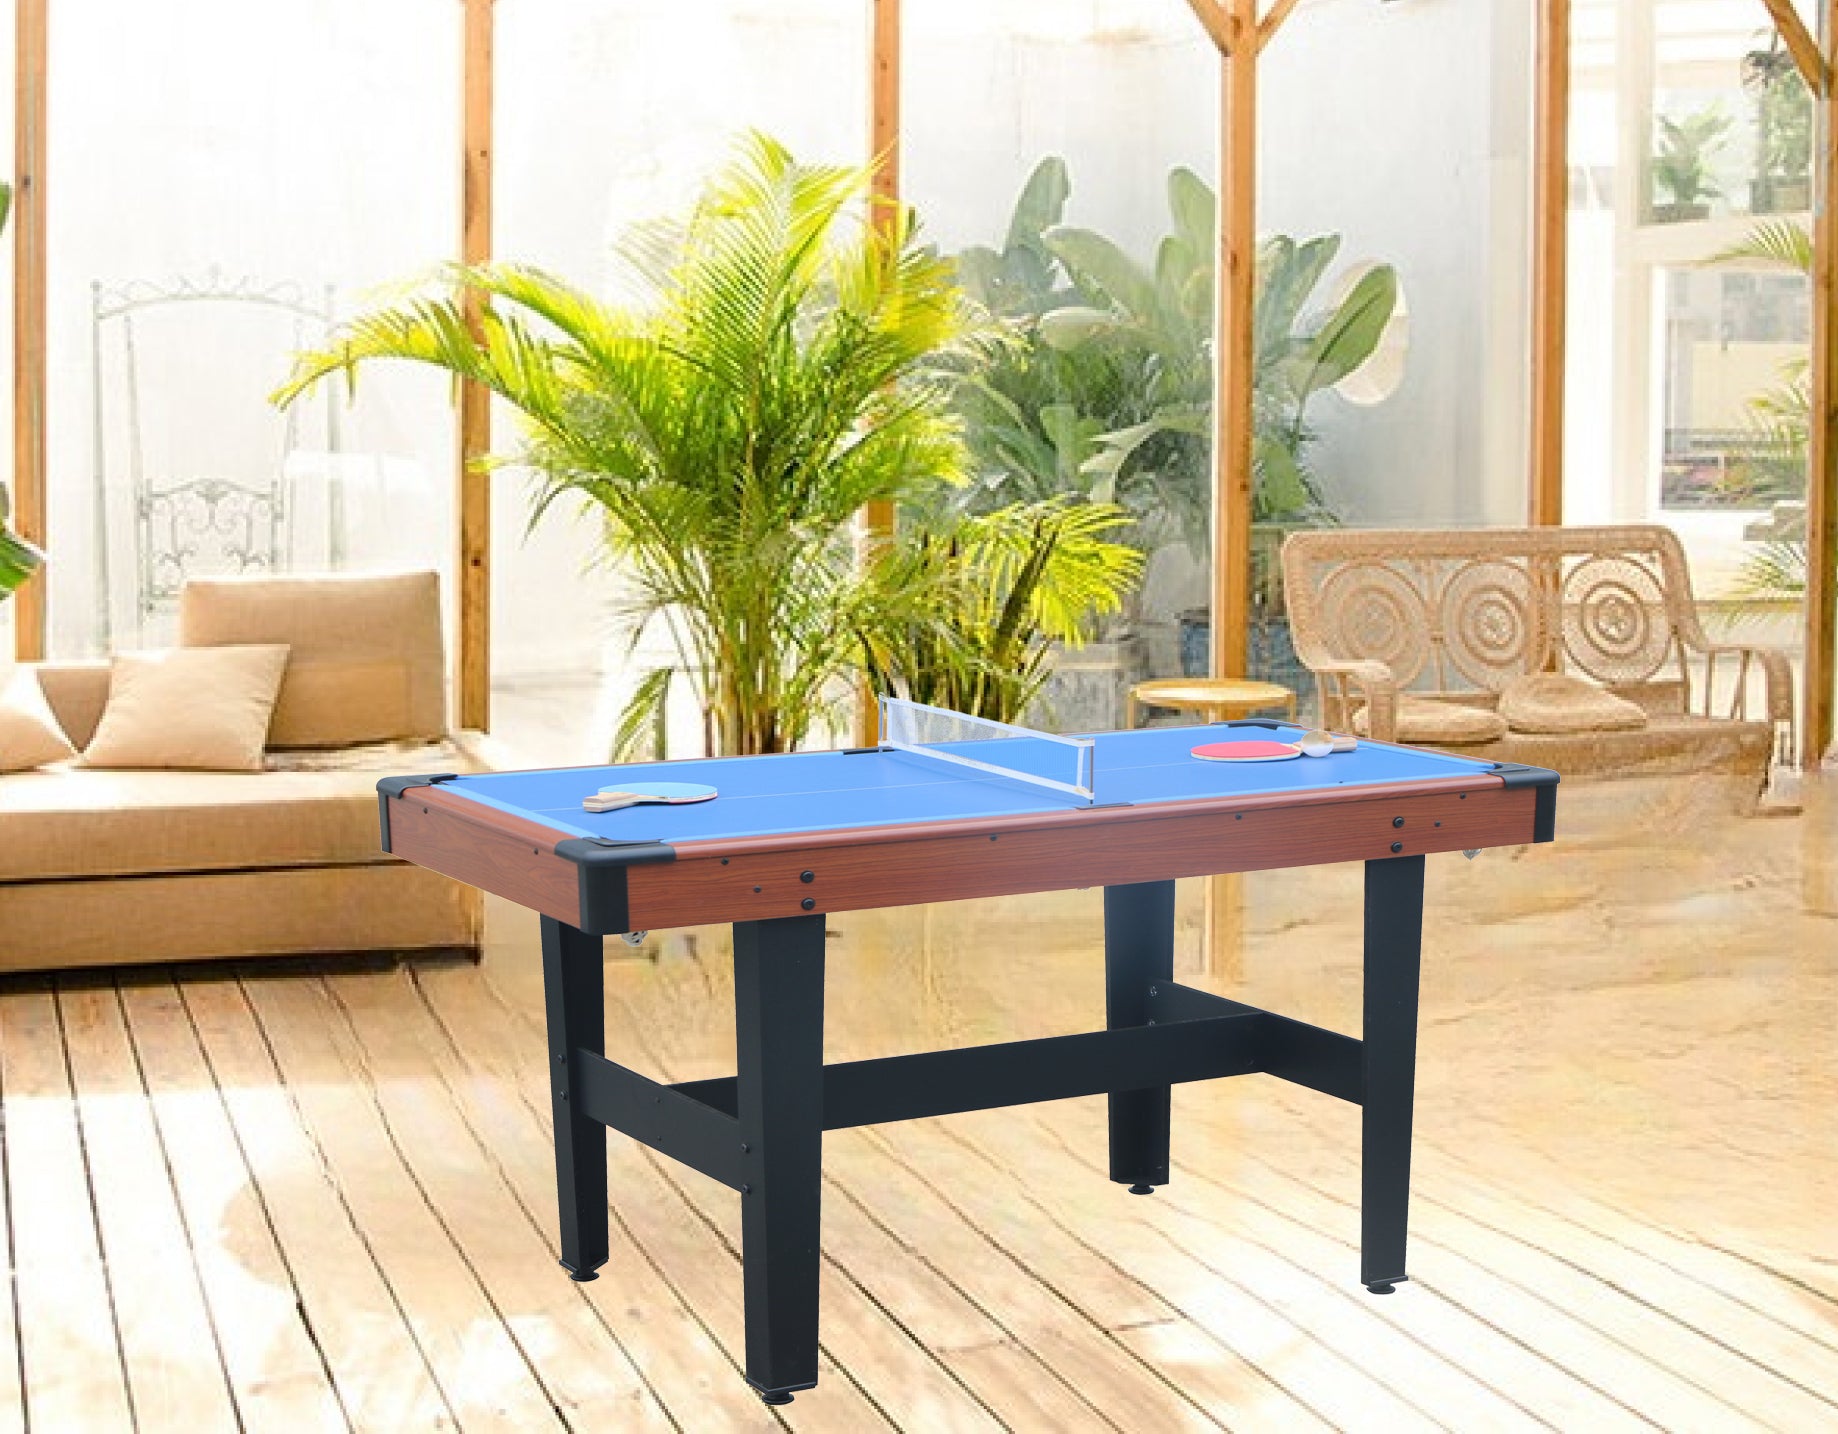 Game Table,Multi Game Table,Pool Table,Tennis -